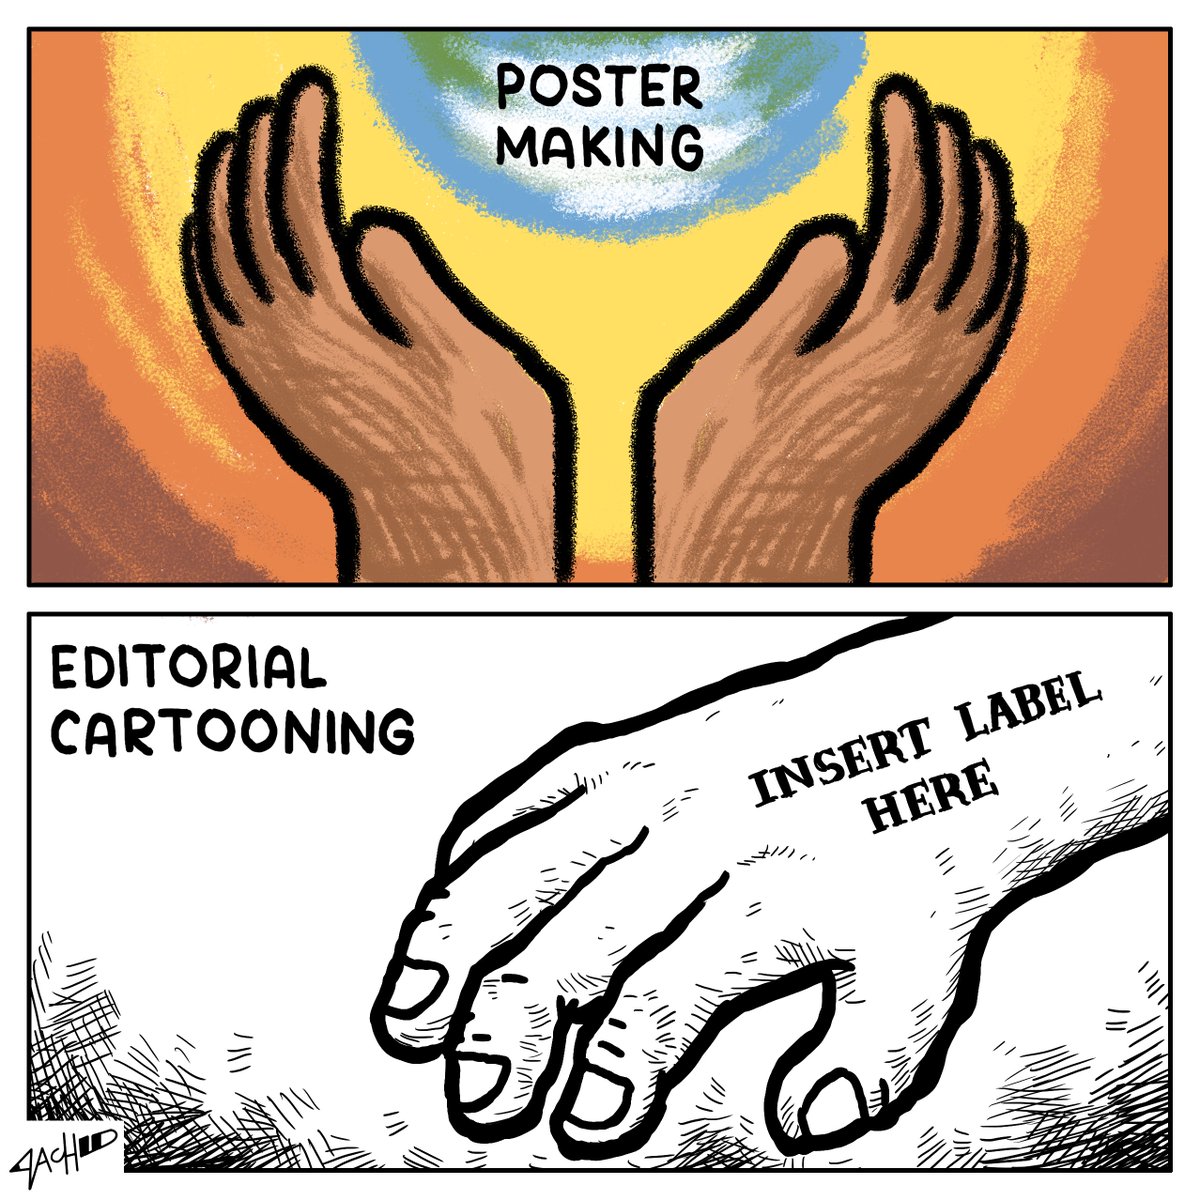 Editorial cartoonists: Give us a big hand please. Poster makers: *Claps with two hands*